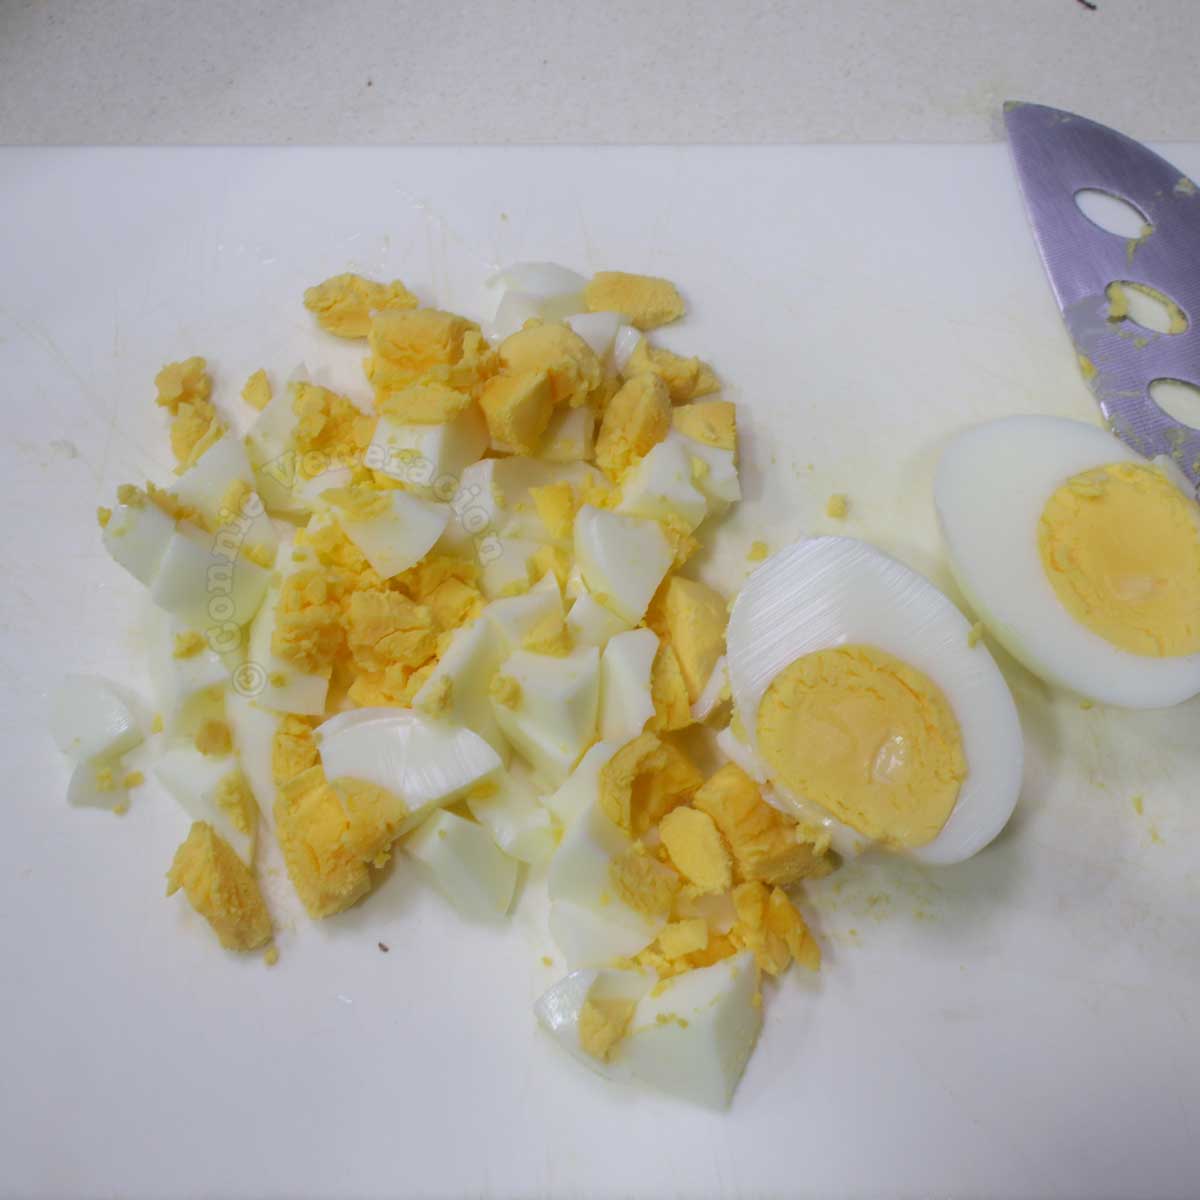 Roughly chopped hard boiled eggs